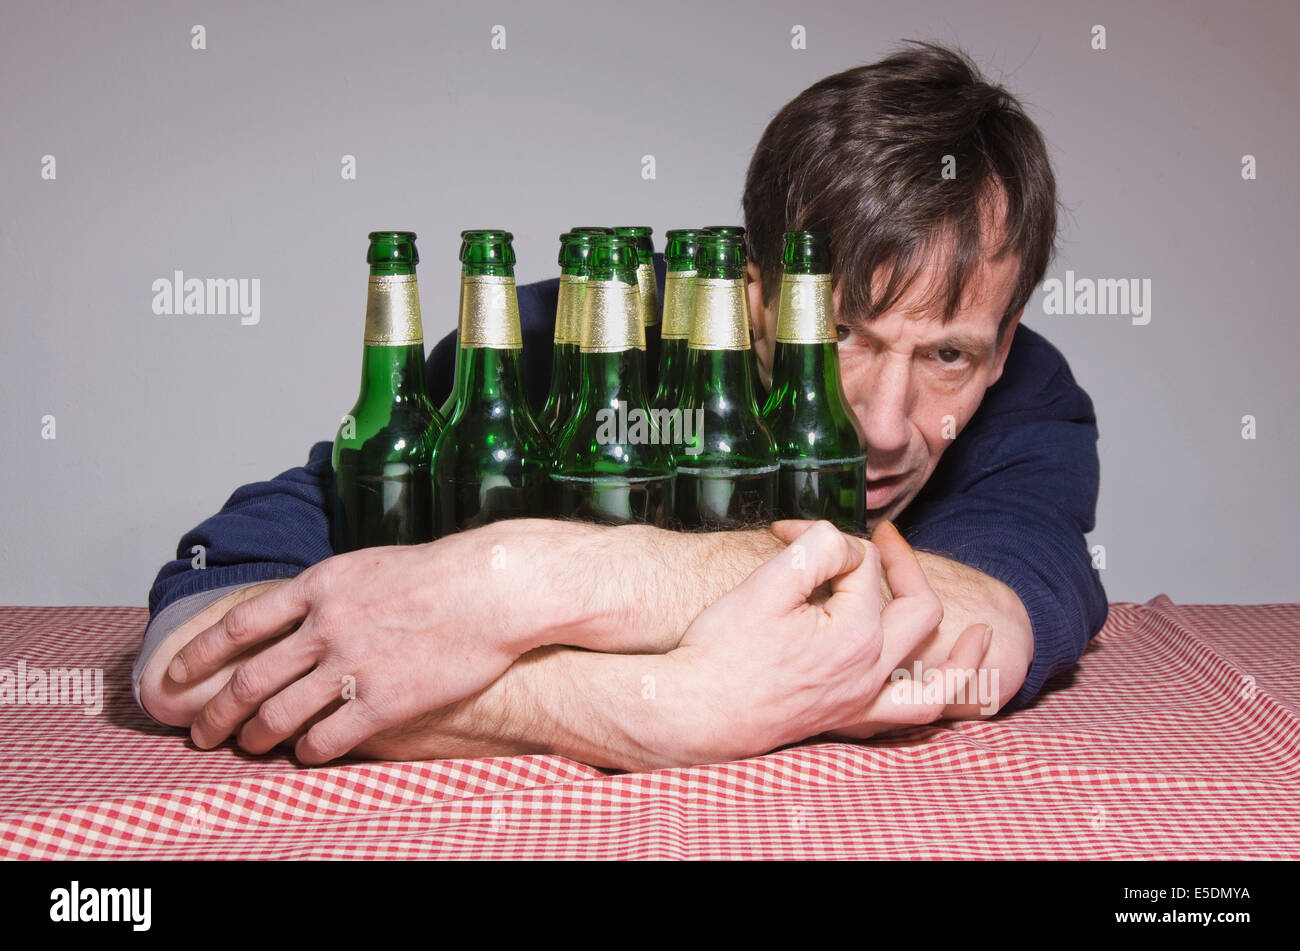 Man at table surrounded by beer bottles Stock Photo